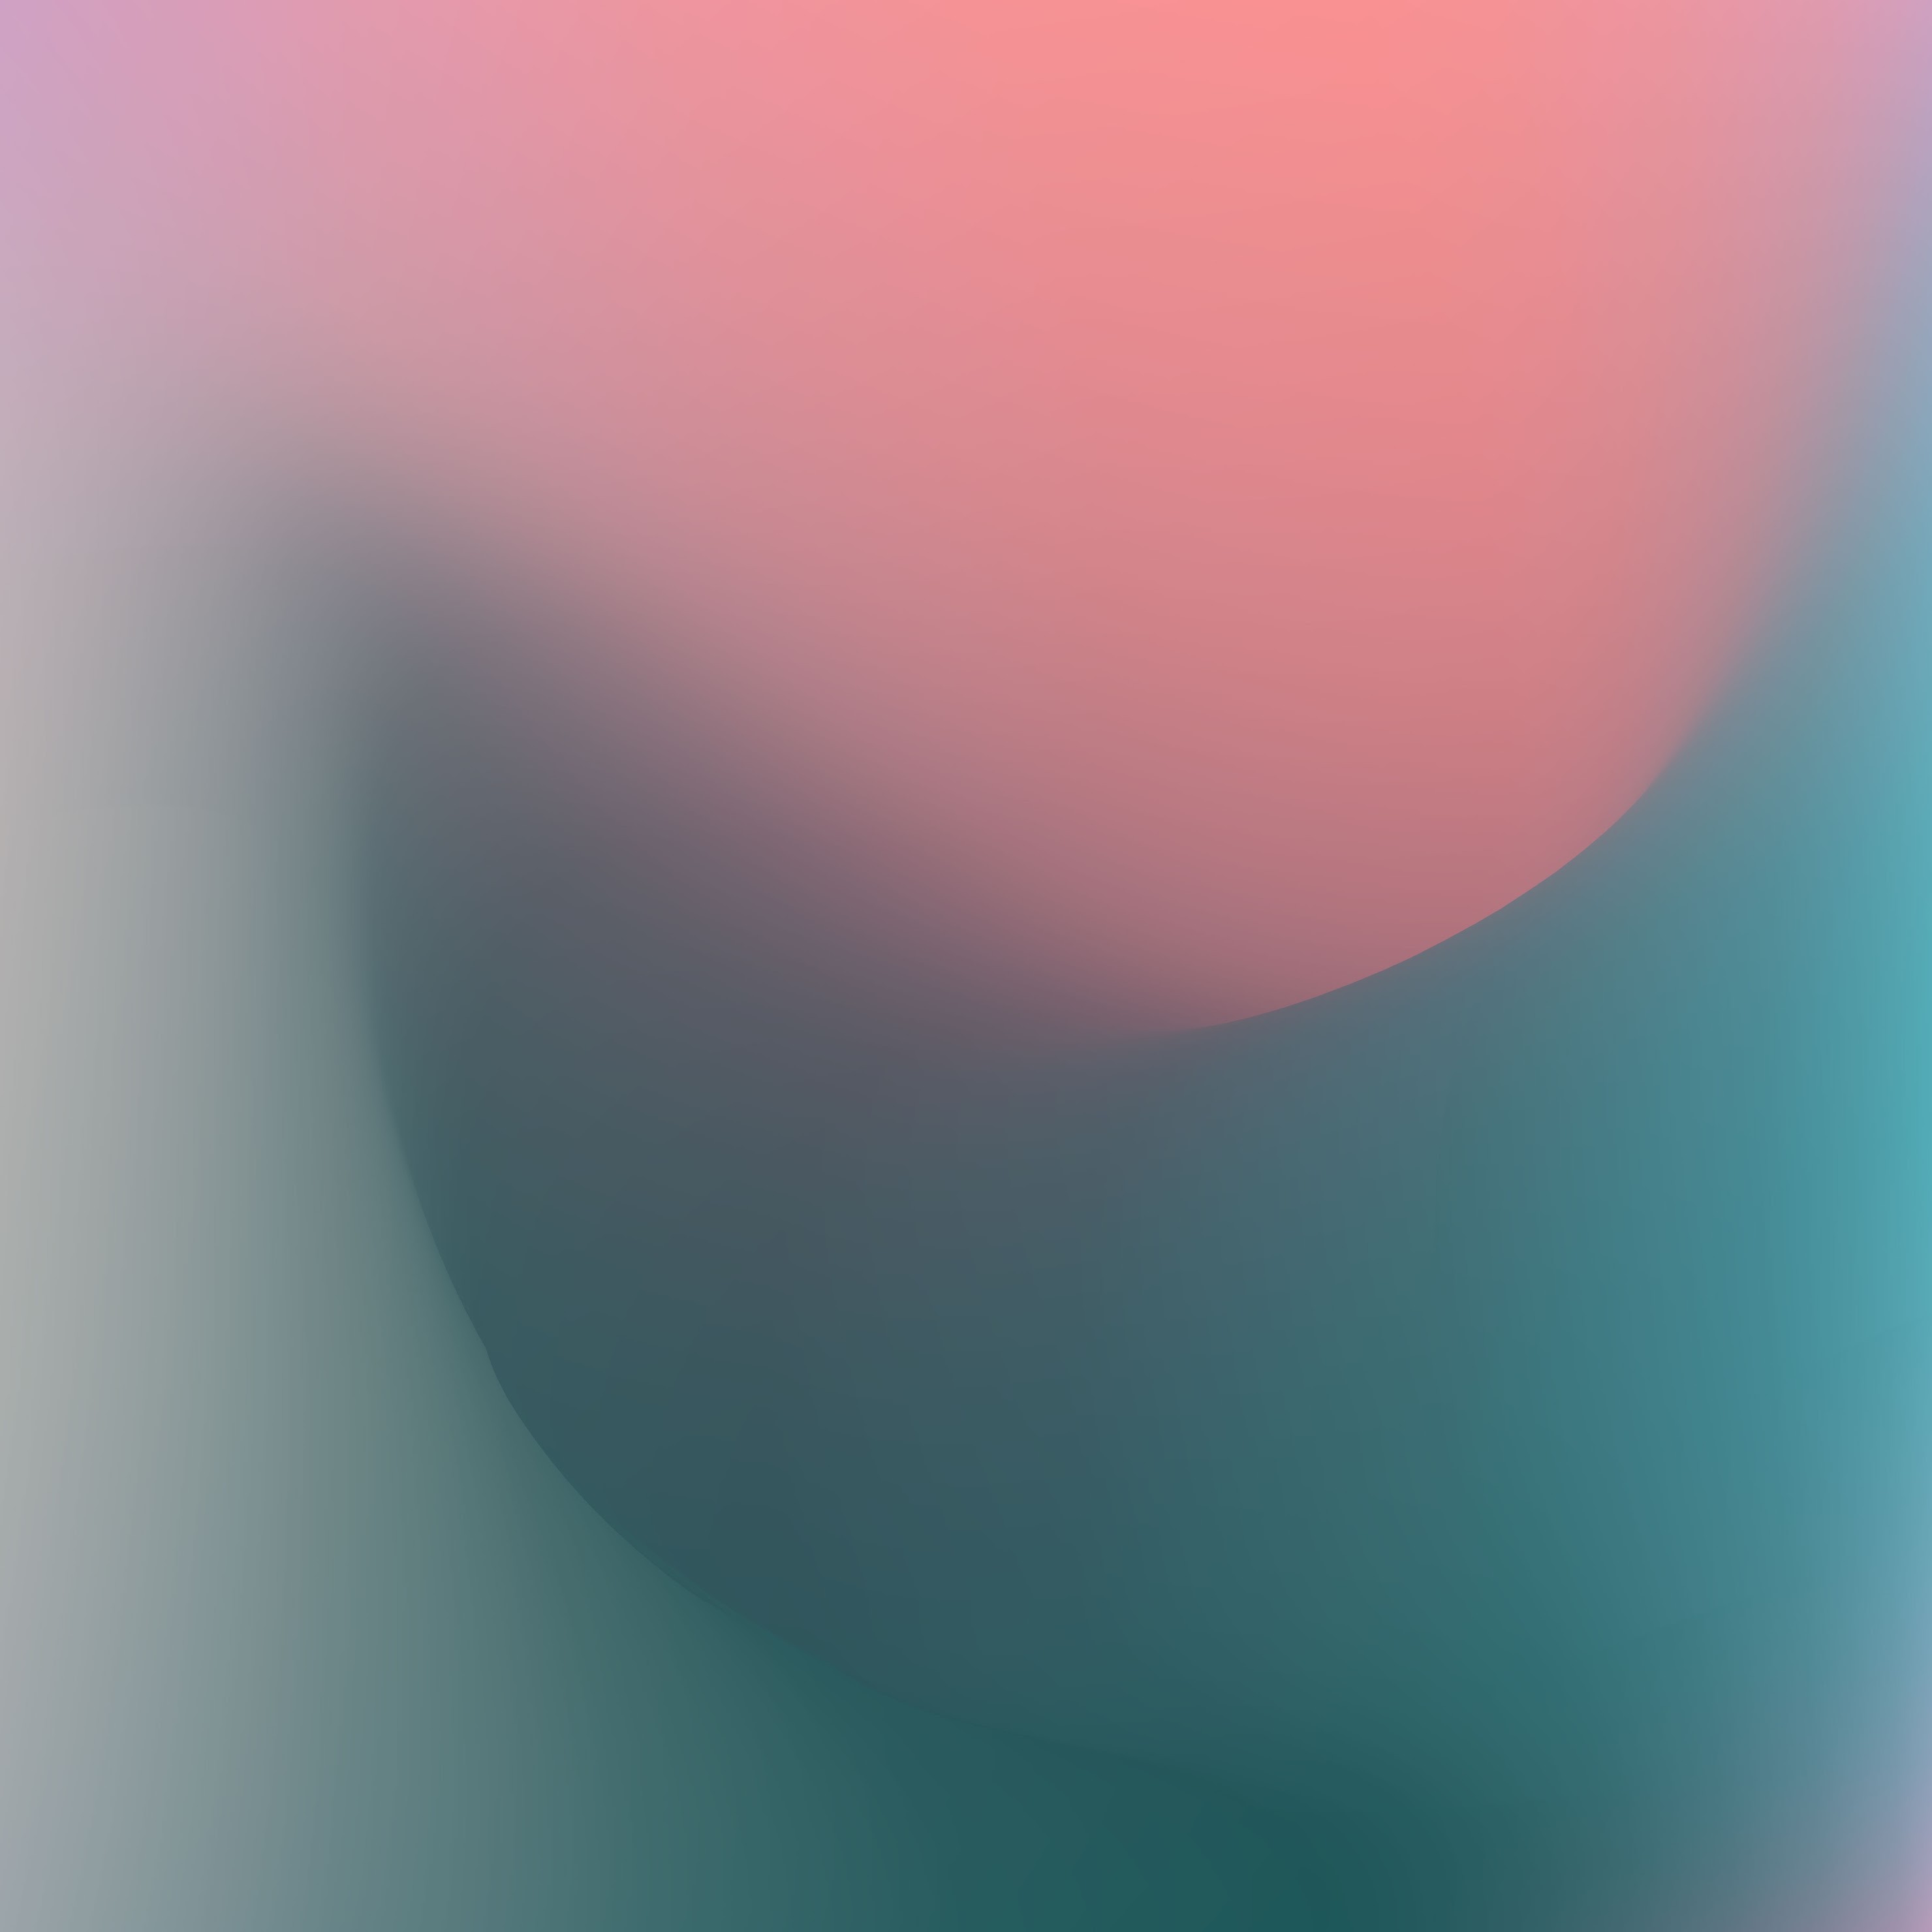 Blurred shapes on a minimalistic background